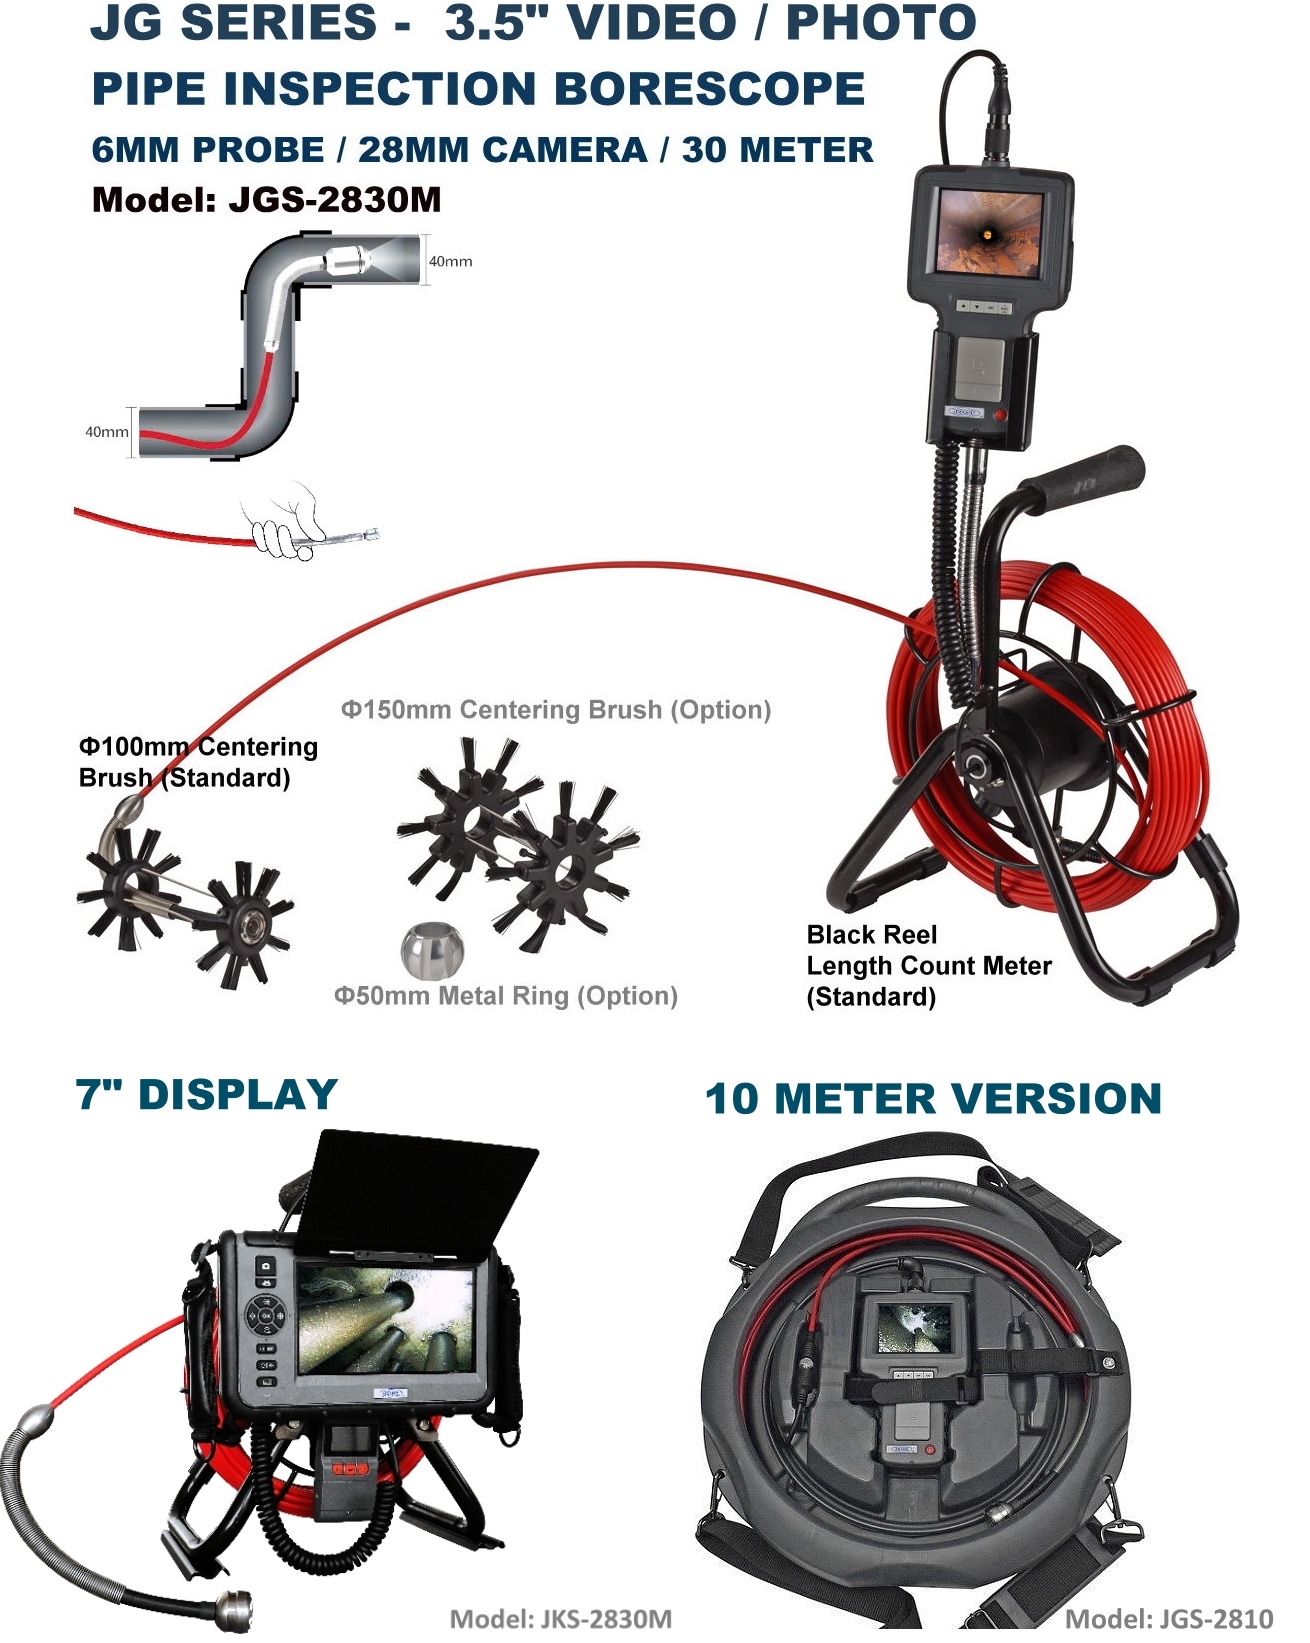 Pipe-sewer-inspection-camera-probe-console-system-j-series